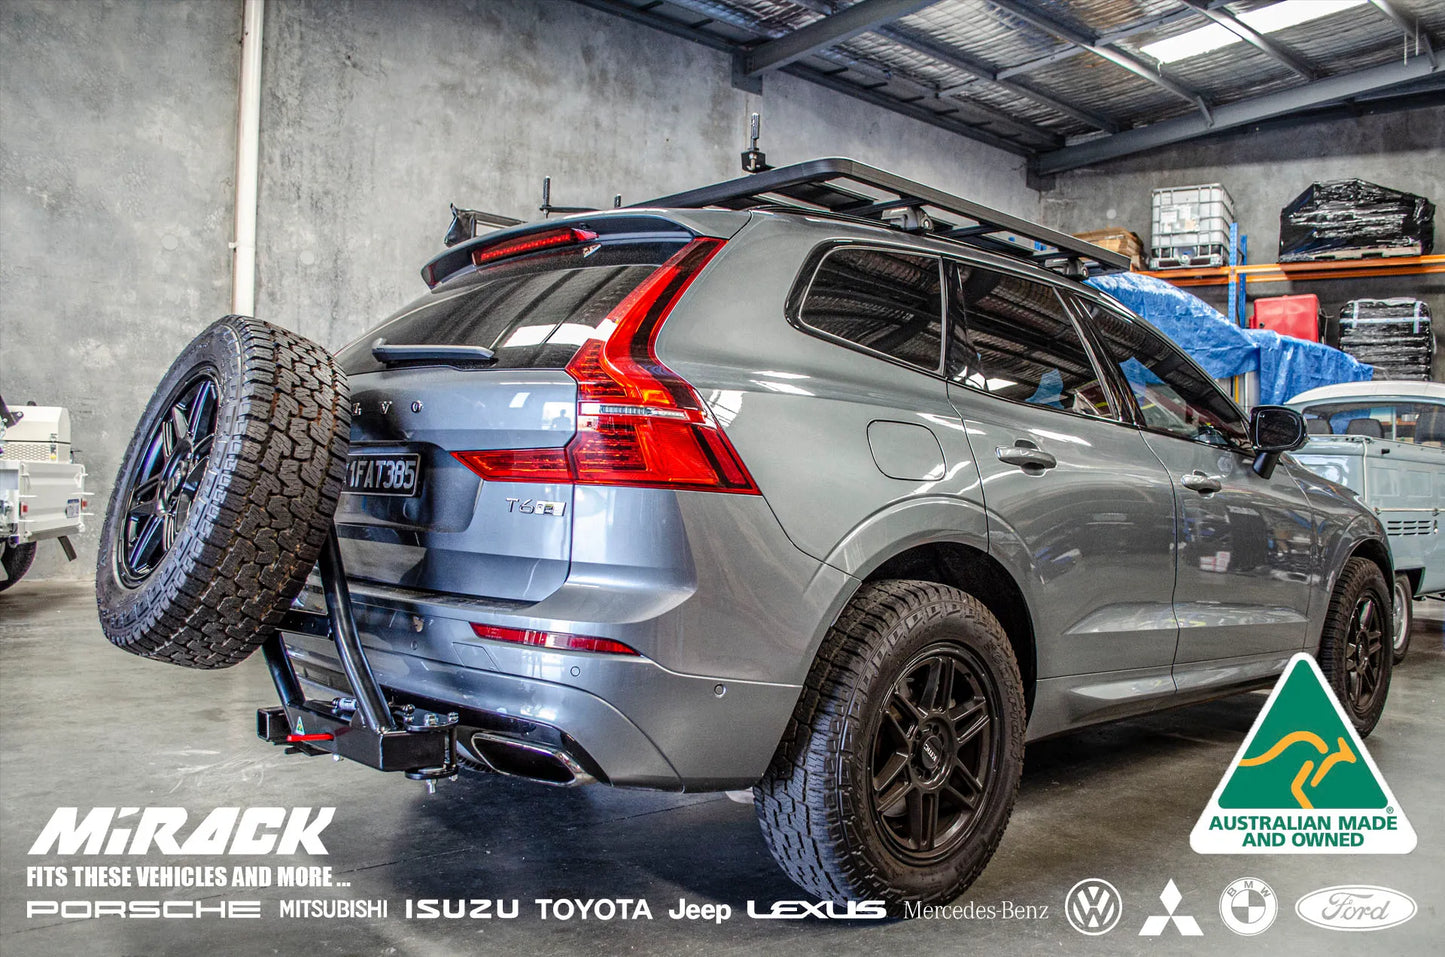 Volvo XC60 aftermarket upgrade: Mirack's heavy-duty swinging spare wheel carrier for improved rear functionality and enhanced off-road capabilities.